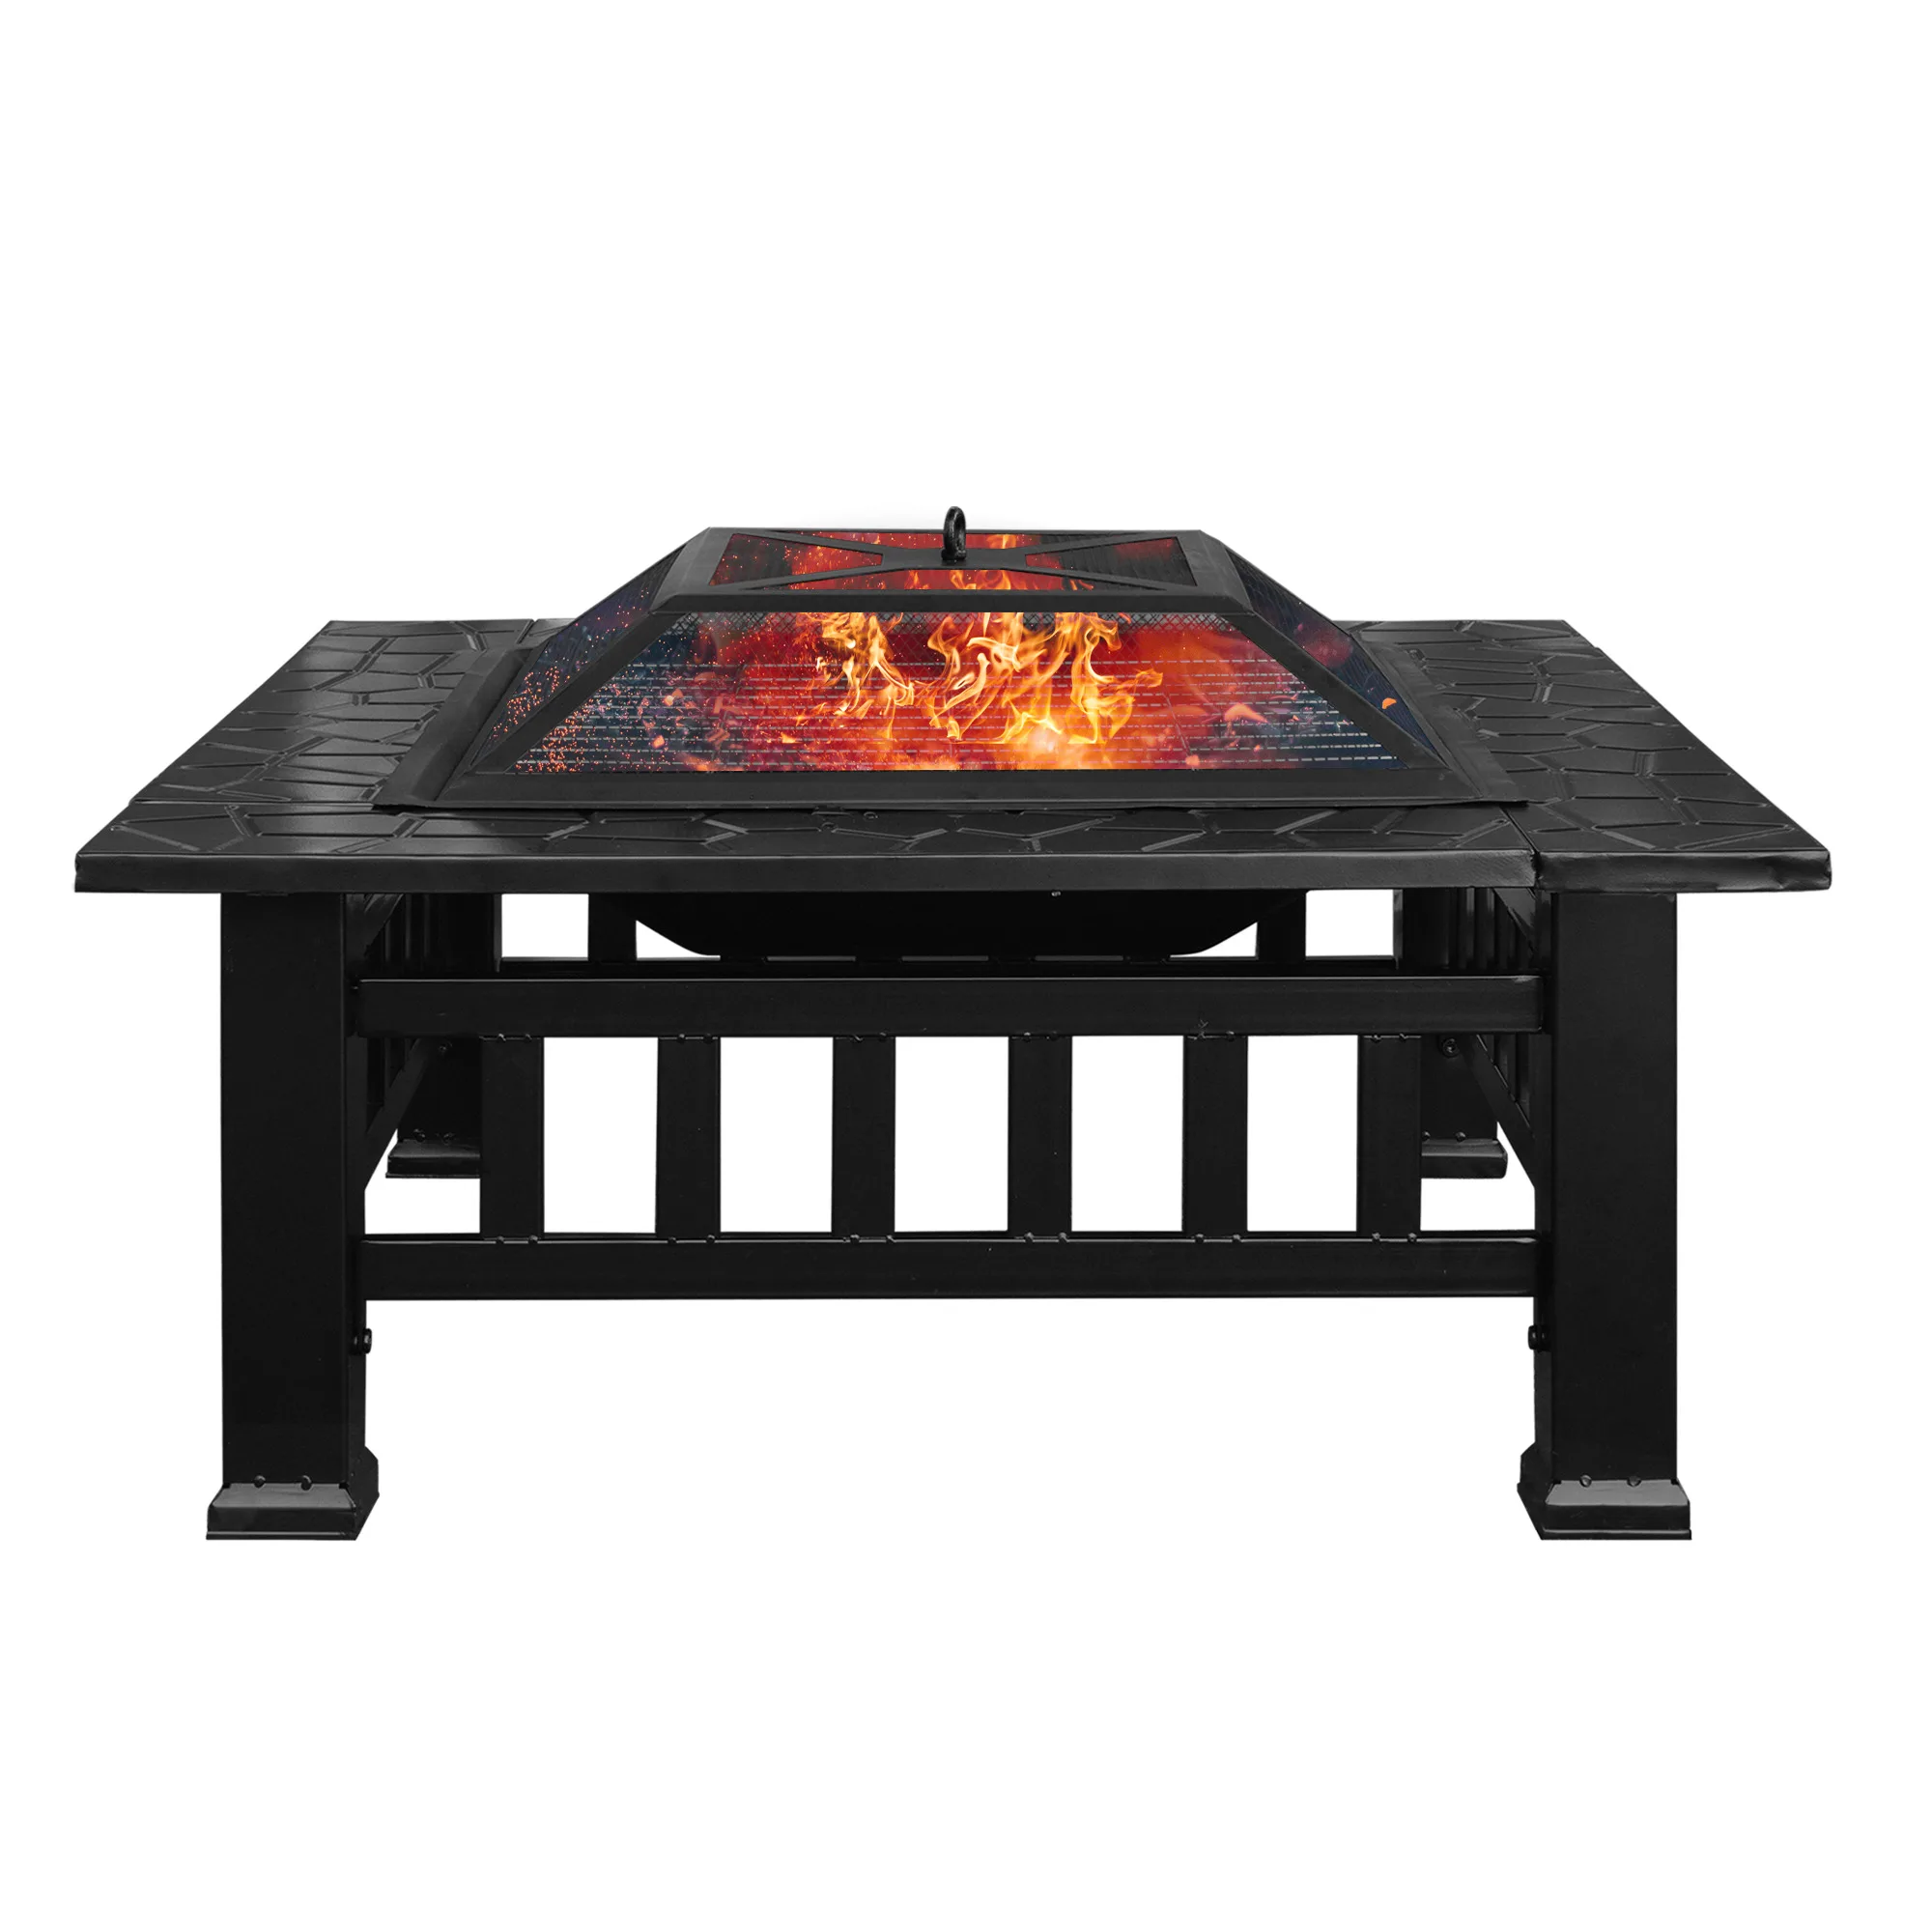 Multifunctional Fire Pit Table 32in 3 in 1 Metal Square Patio Firepit Table BBQ Garden Stove with Spark Screen, Cover, Log Grate